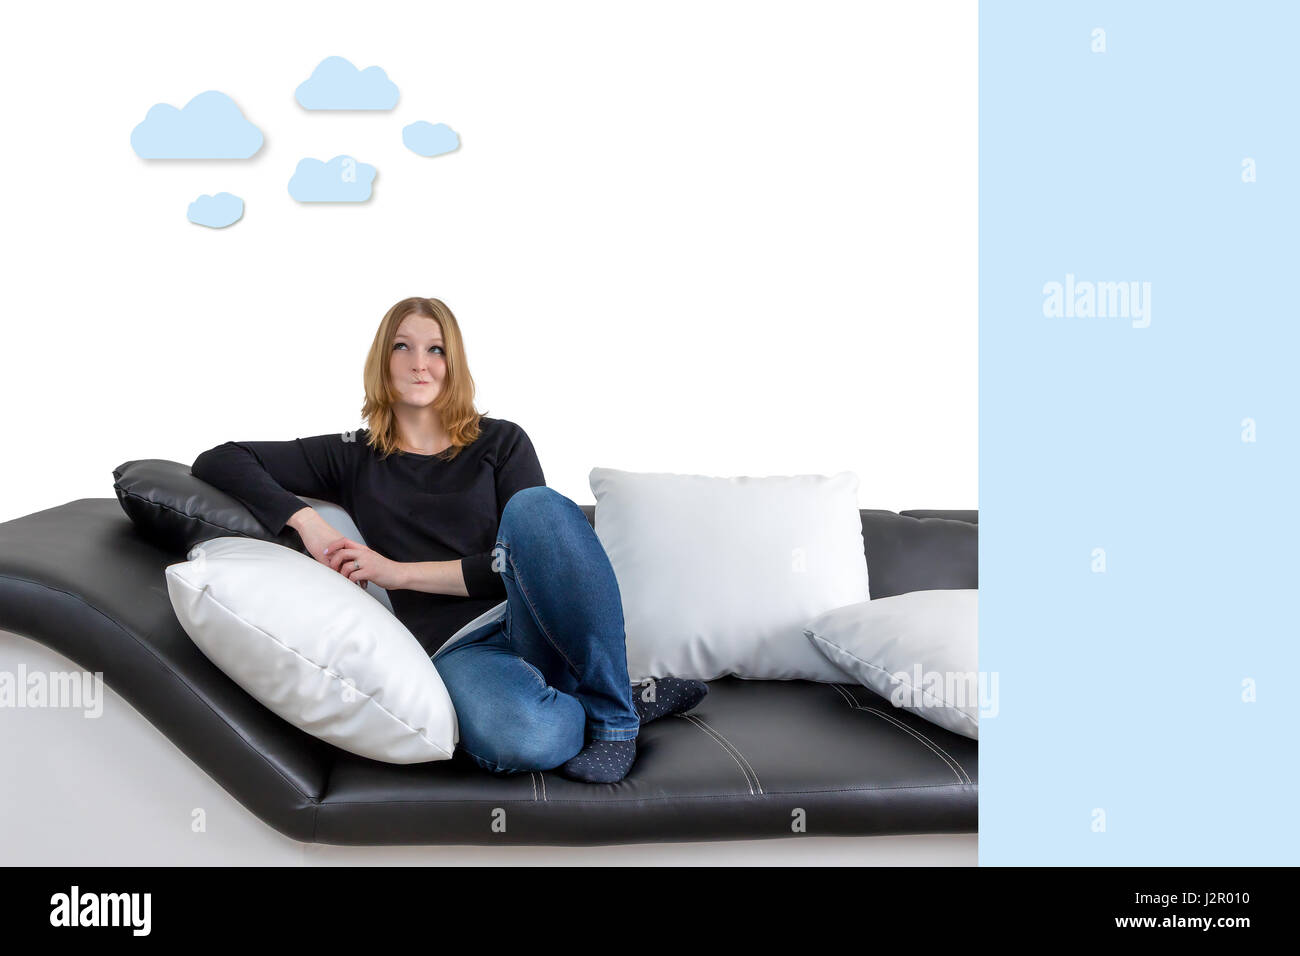 Grinning long haired young woman is sitting on a black and white couch with black and white pillows. Woman is looking upwards on the illustration of c Stock Photo